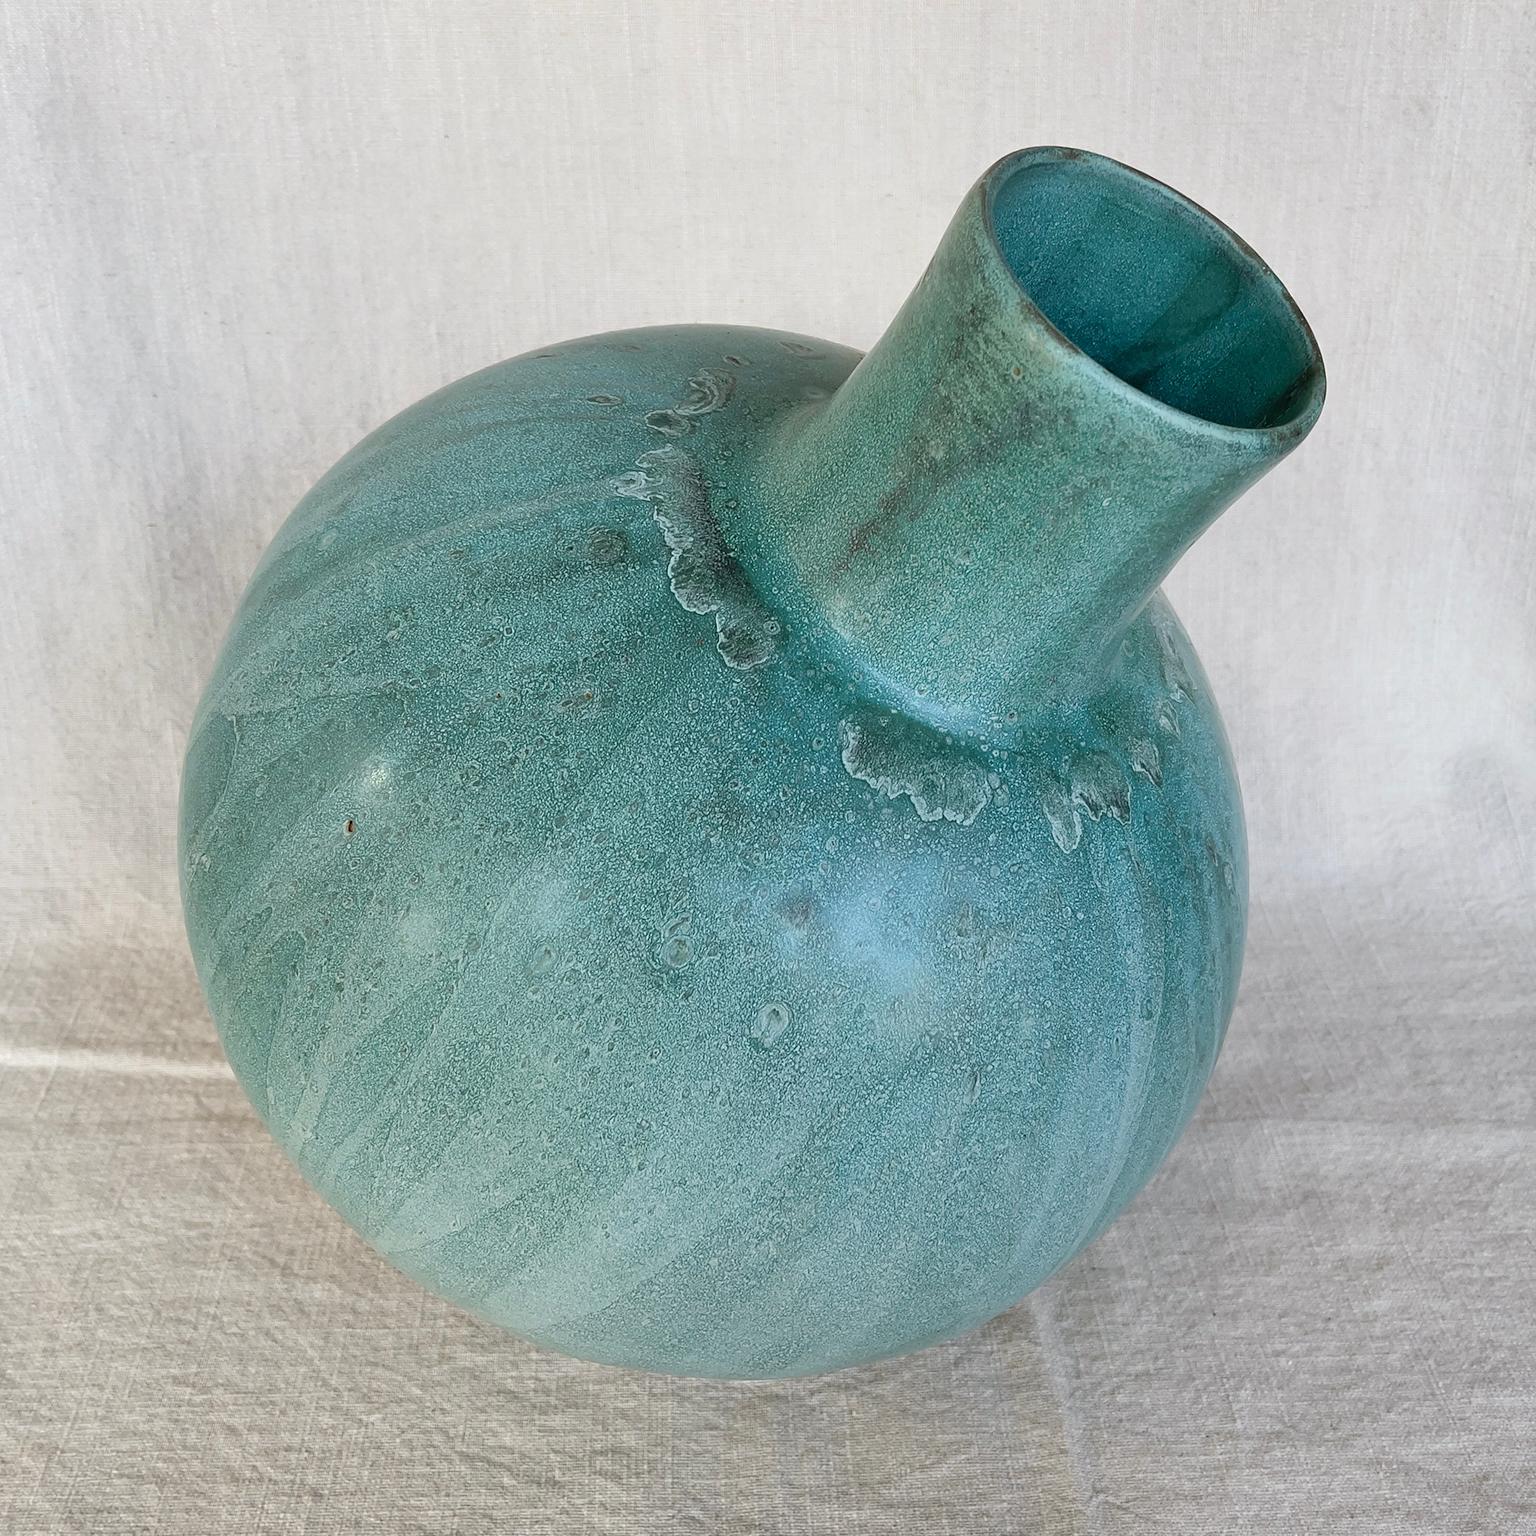 Glazed Thom Lussier Ceramic Vessel #4, from the Oxidized Copper Collection